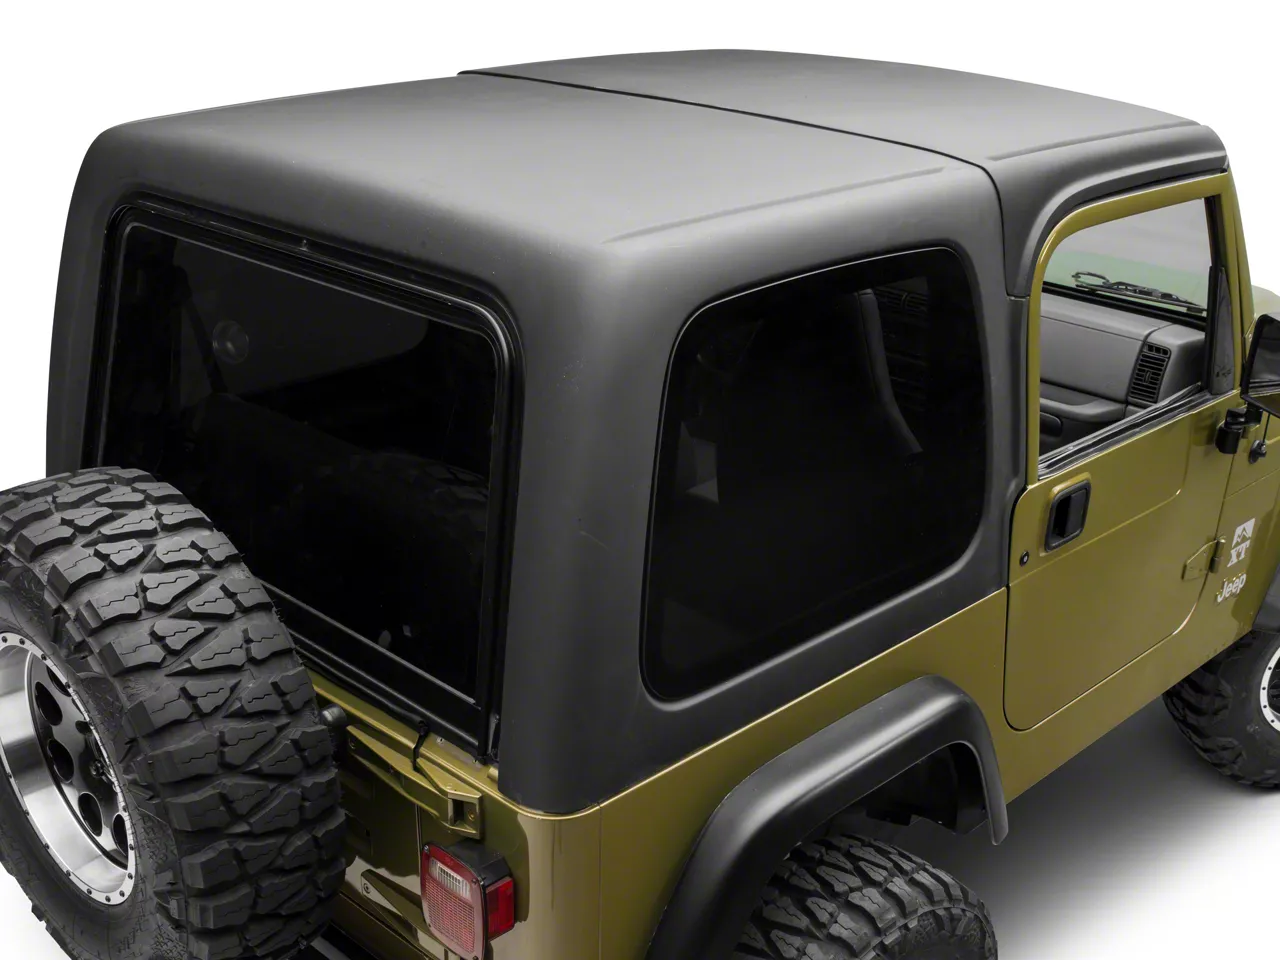 Jeep Wrangler Two-Piece Hard Top for Full Doors (97-06 Jeep Wrangler TJ